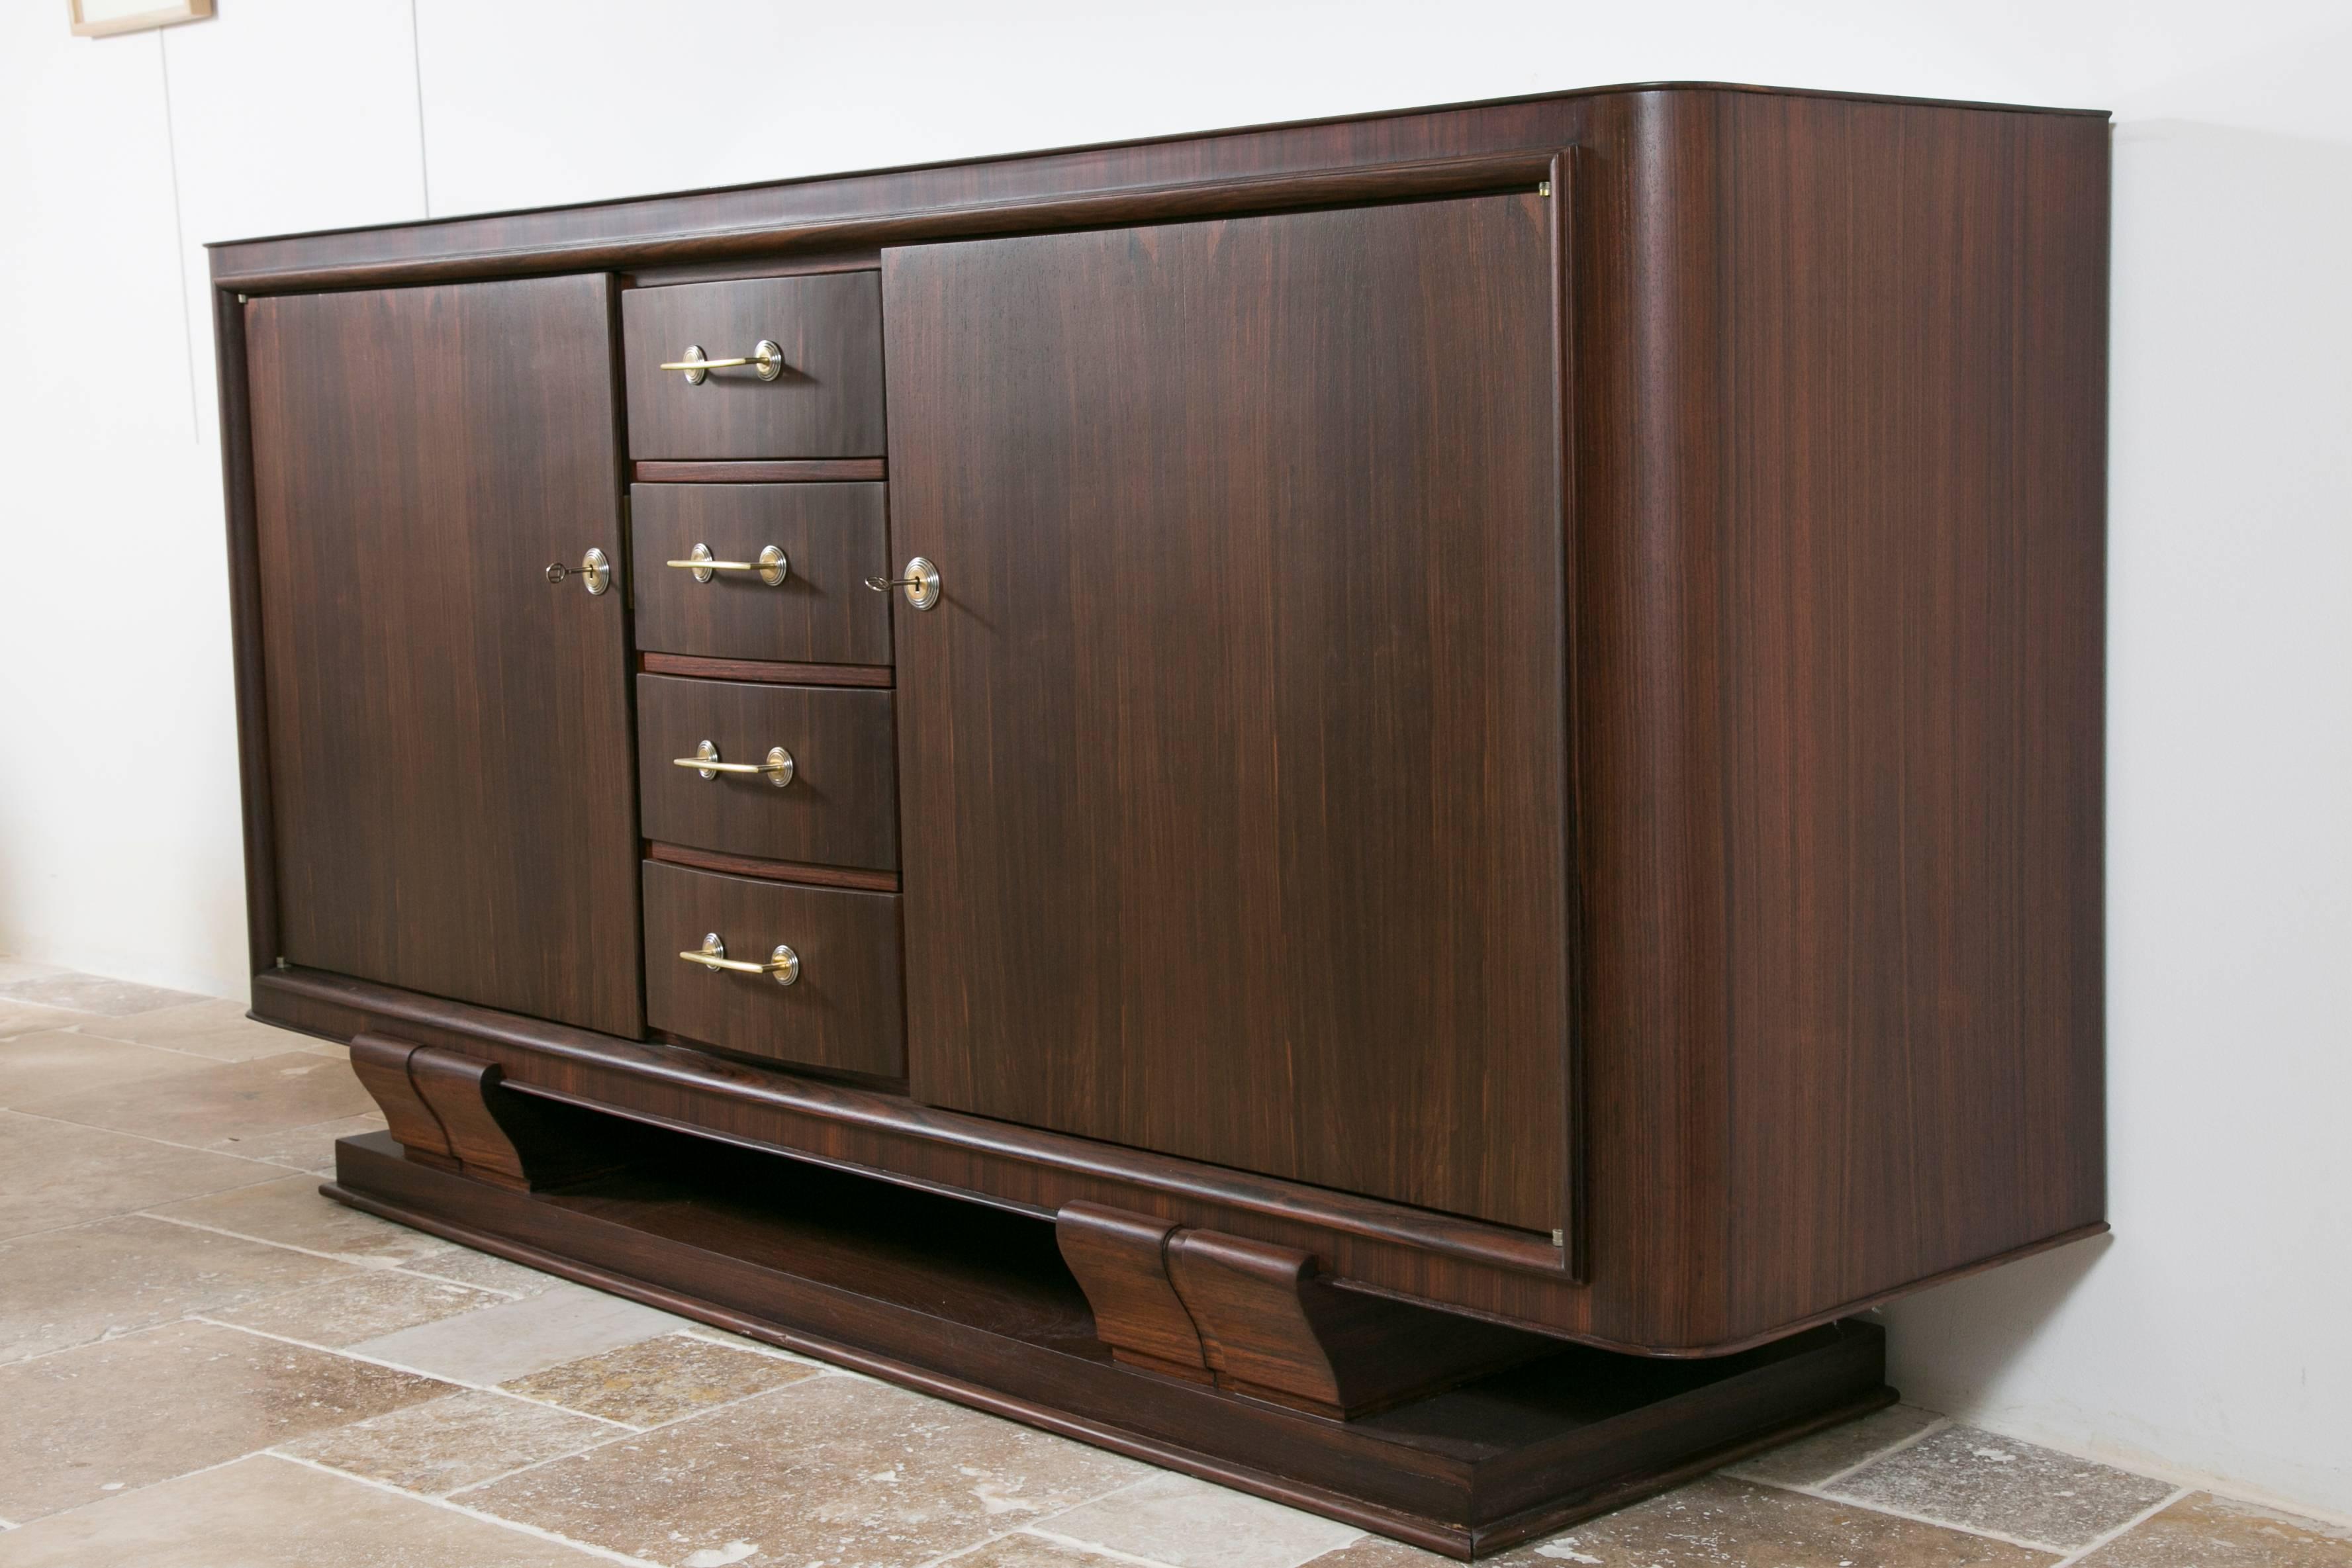 Elegant palisander cabinet by great cabinetmaker of 20th century Maxime Old (1910-1991).